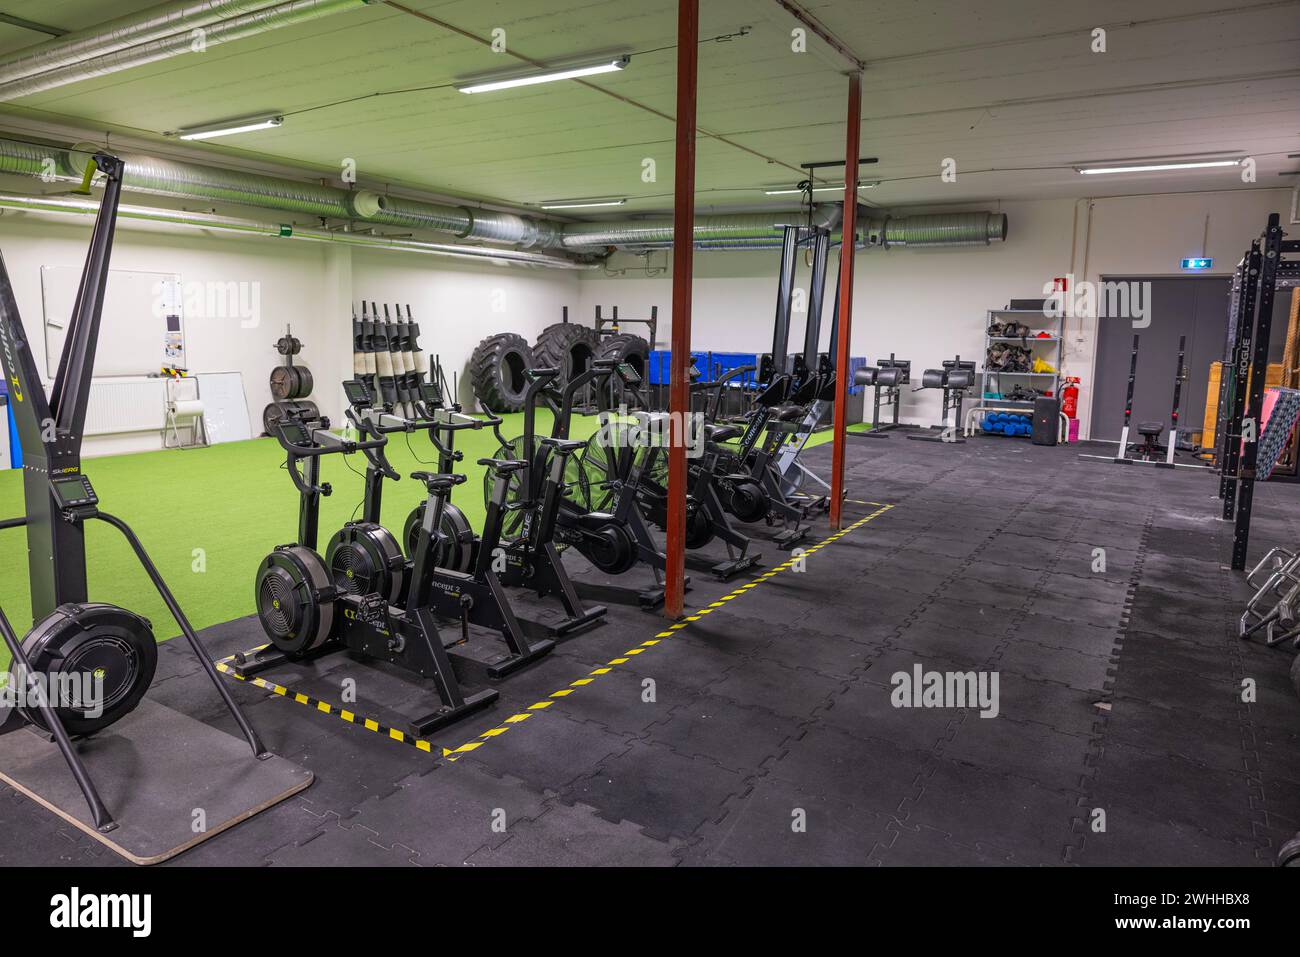 Gym equipped with various strength machines, promoting a healthy lifestyle. Stock Photo